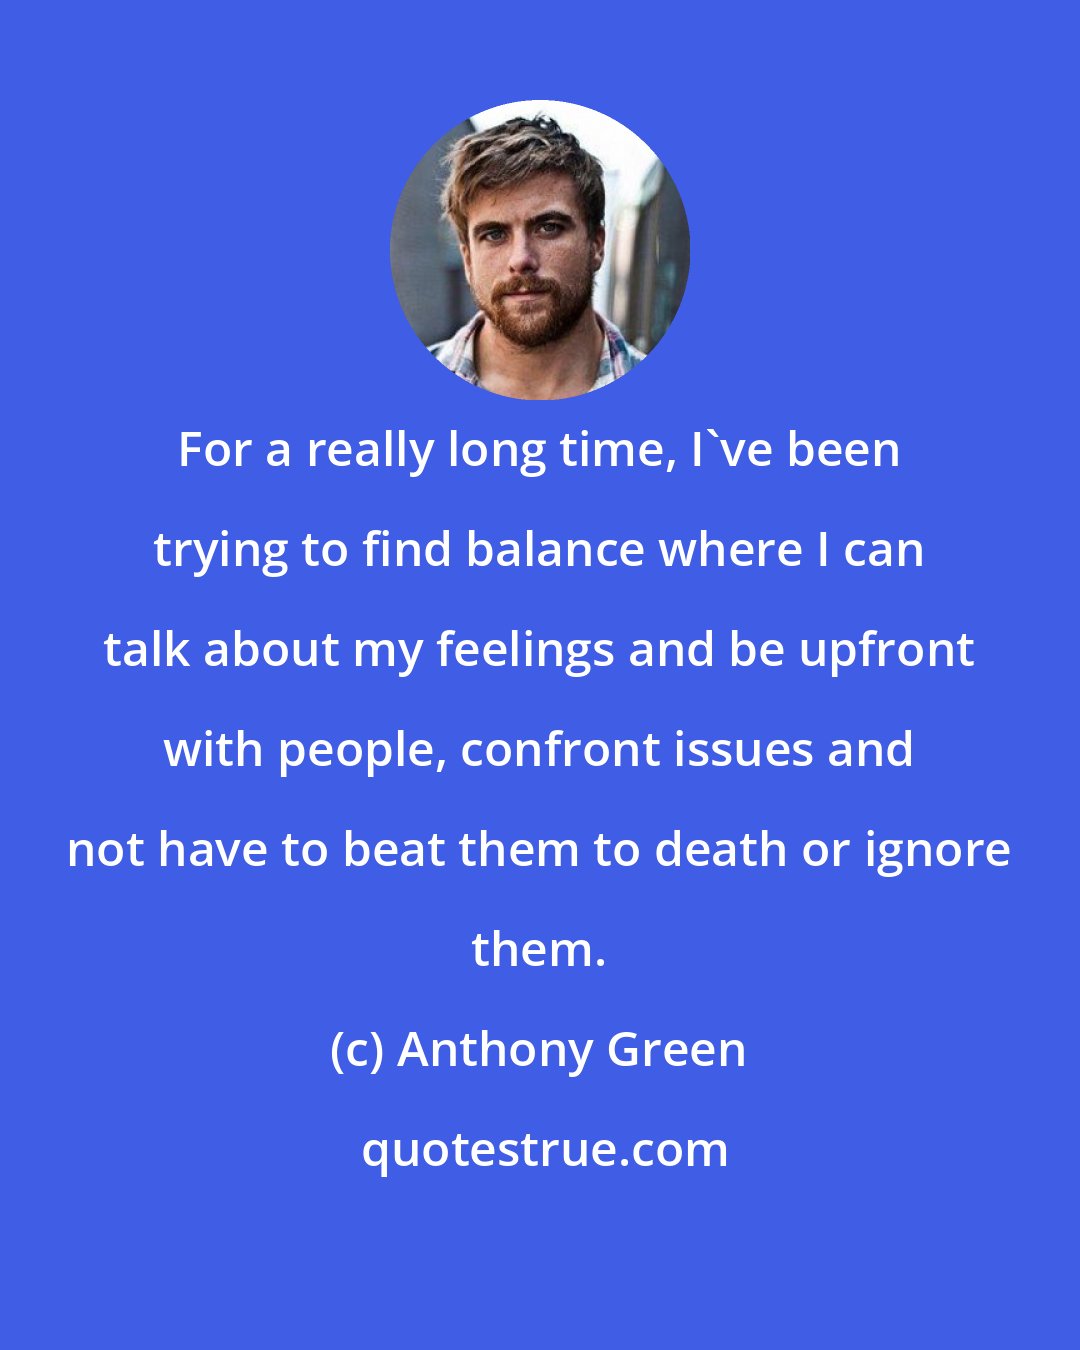 Anthony Green: For a really long time, I've been trying to find balance where I can talk about my feelings and be upfront with people, confront issues and not have to beat them to death or ignore them.